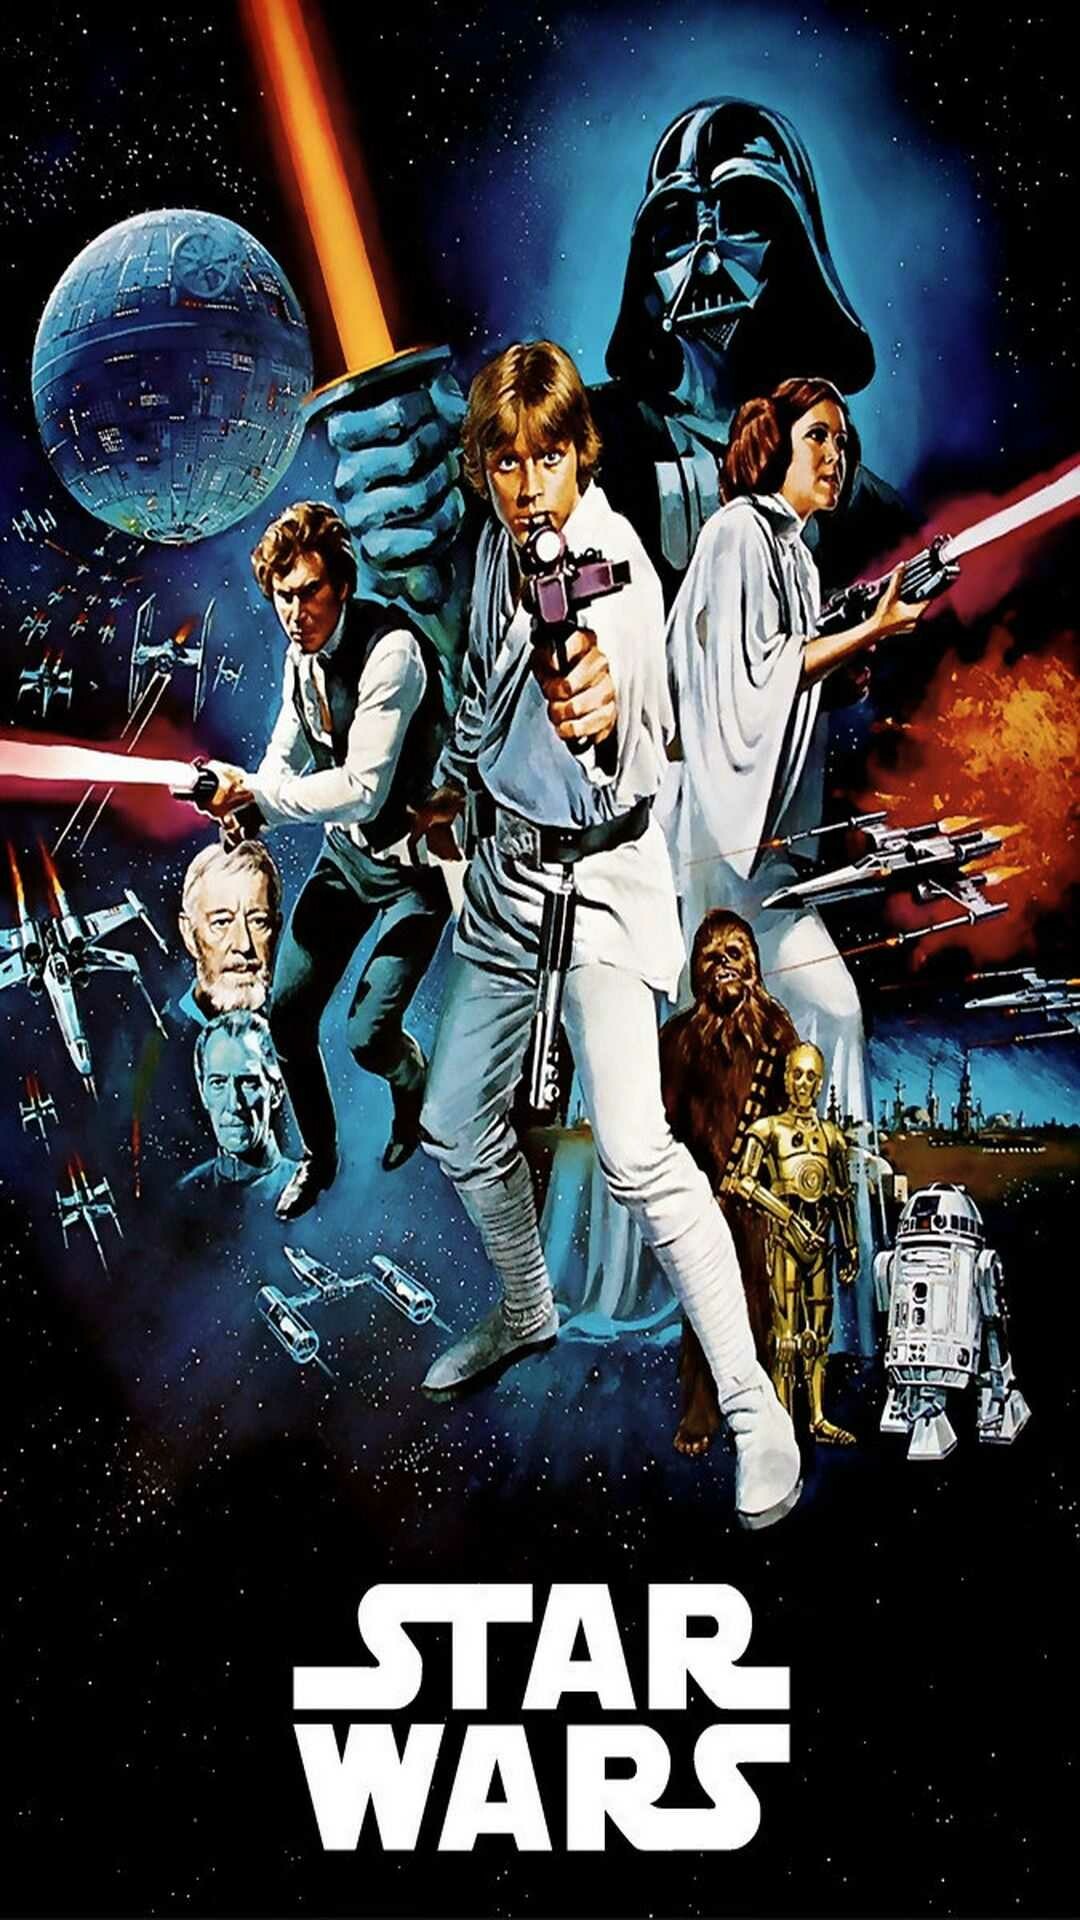 Star Wars: It began as a space opera detailing the fall and rise of the Skywalker family. 1080x1920 Full HD Wallpaper.